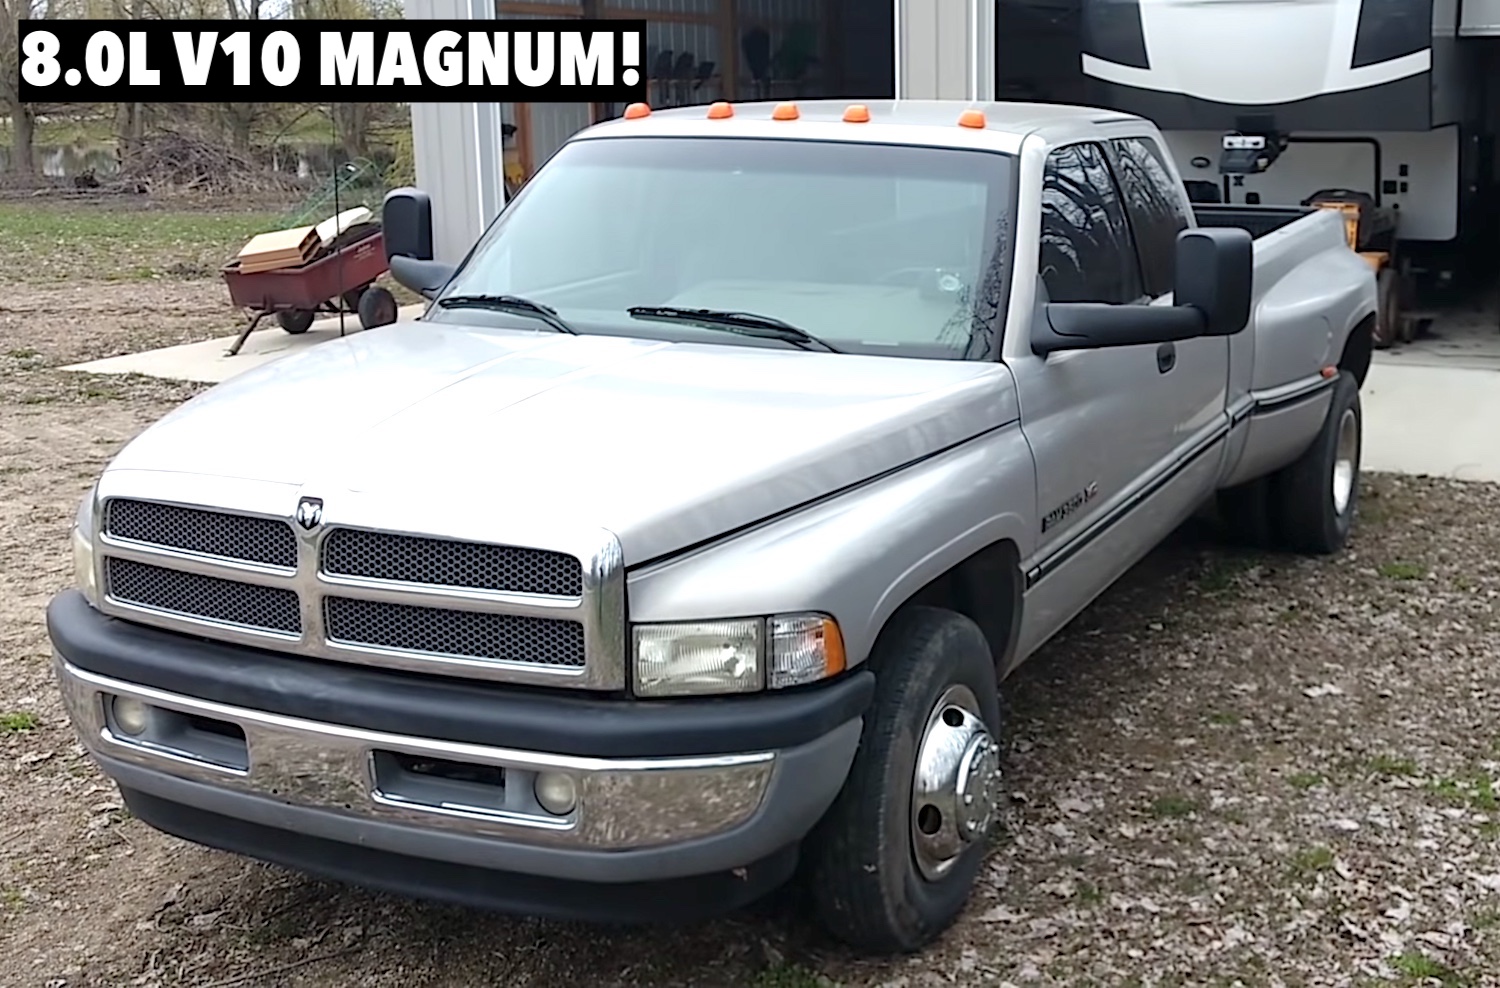 This Dodge Ram 3500 HD Dually Is Packing an 8.0-Liter V10 MAGNUM 1996 Dodge Ram 3500 Dually Towing Capacity